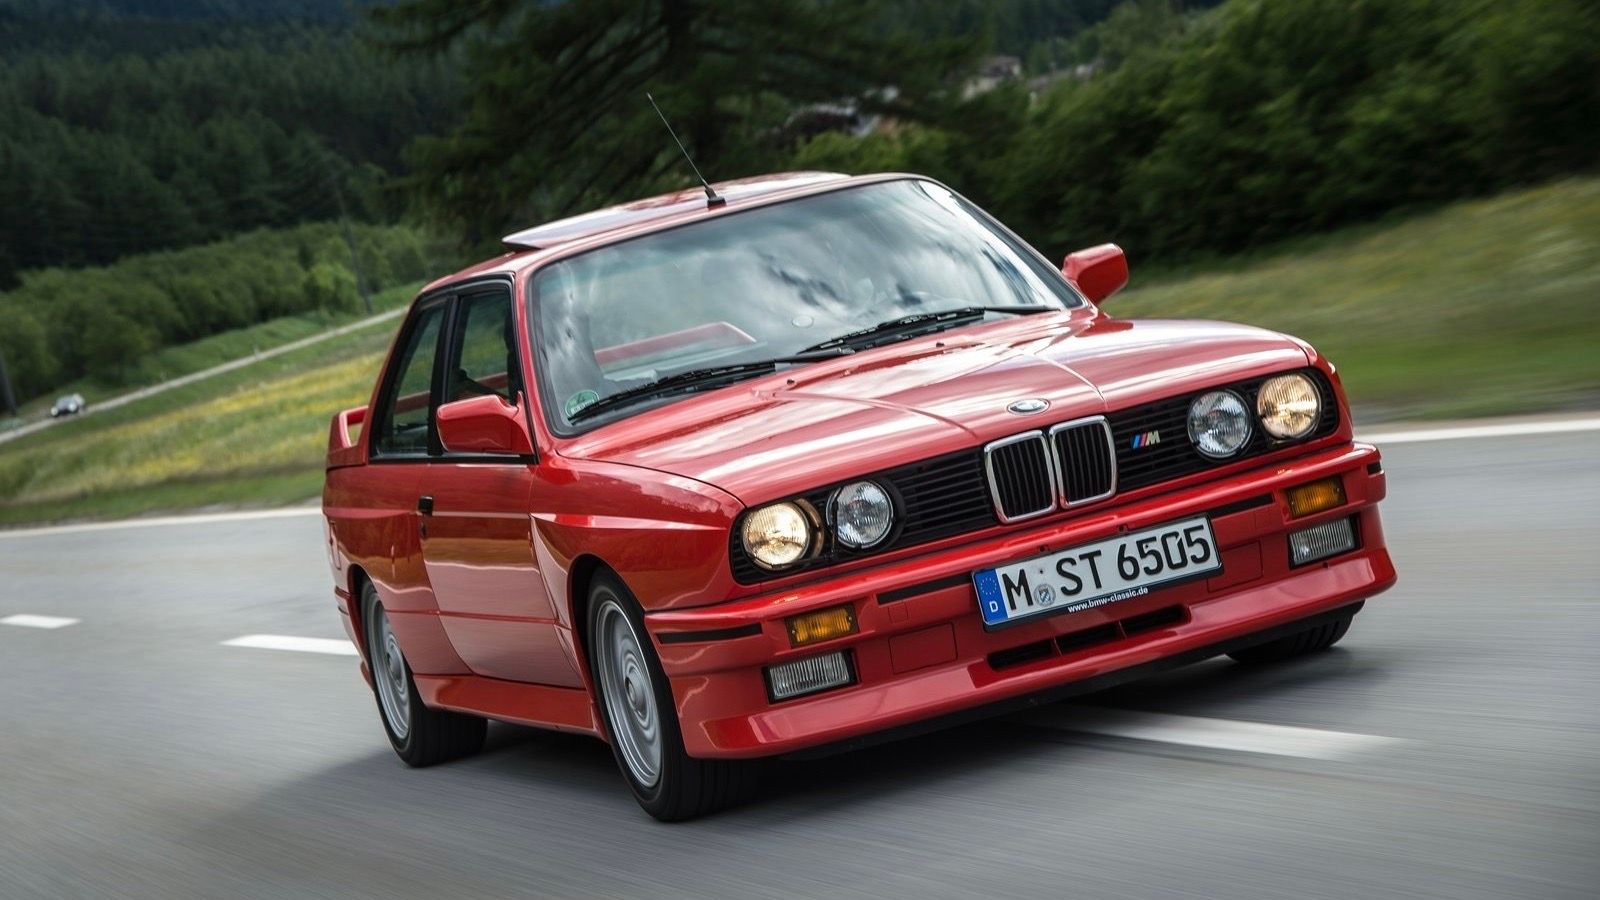 10 Fun Facts About The E30 BMW M3